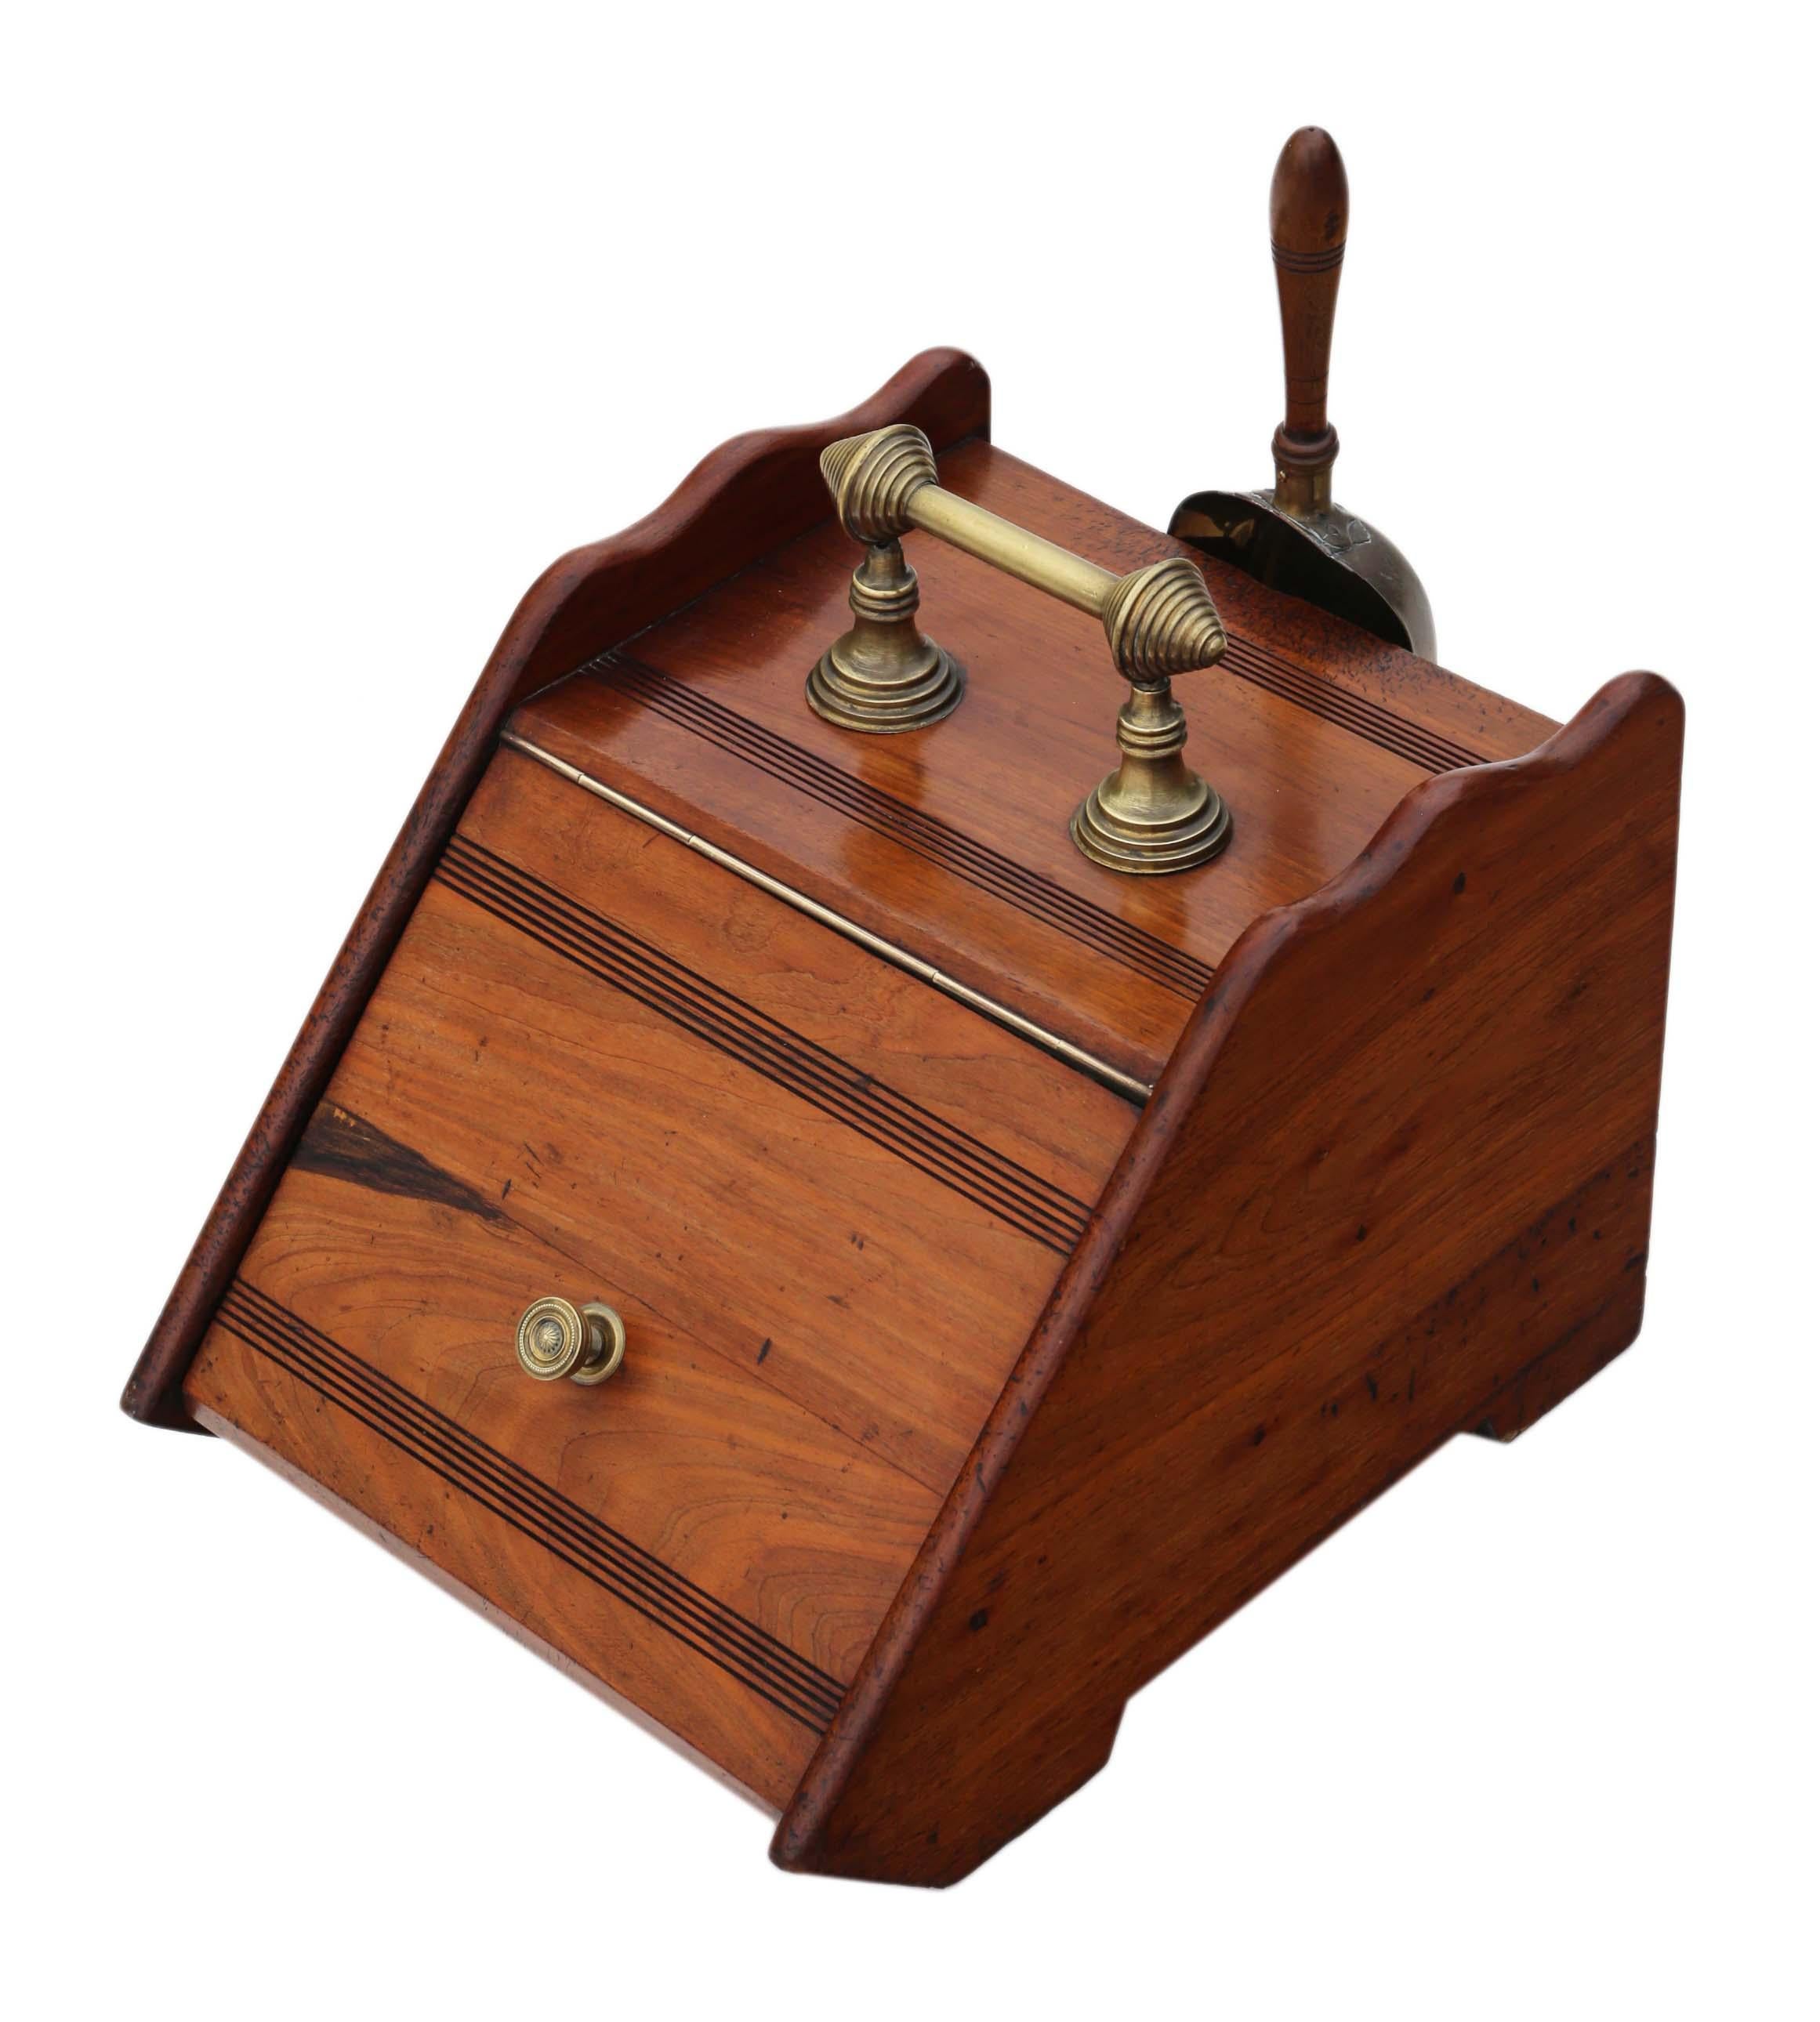 Antique quality walnut coal scuttle box or cabinet, circa 1900.
This is a lovely item, that is full of charm and character.
This is a heavy quality piece, with no loose joints... far better than most. No woodworm.
Good age and patina, would look